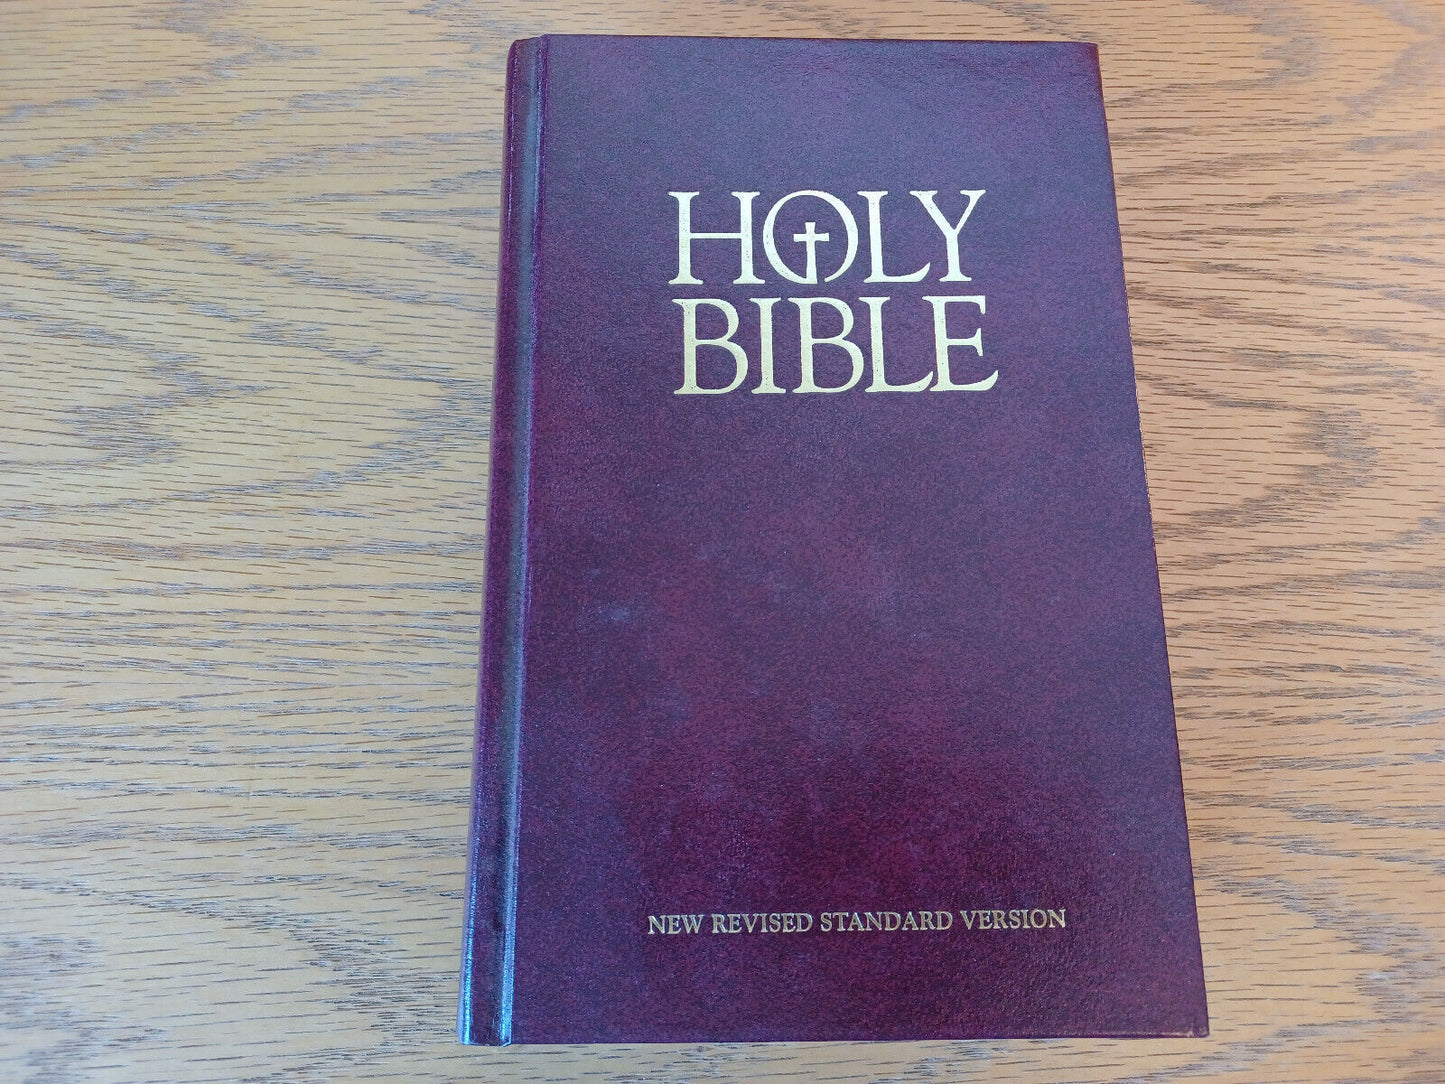 Holy Bible New Revised Standard Version American Bible Society Hardcover C